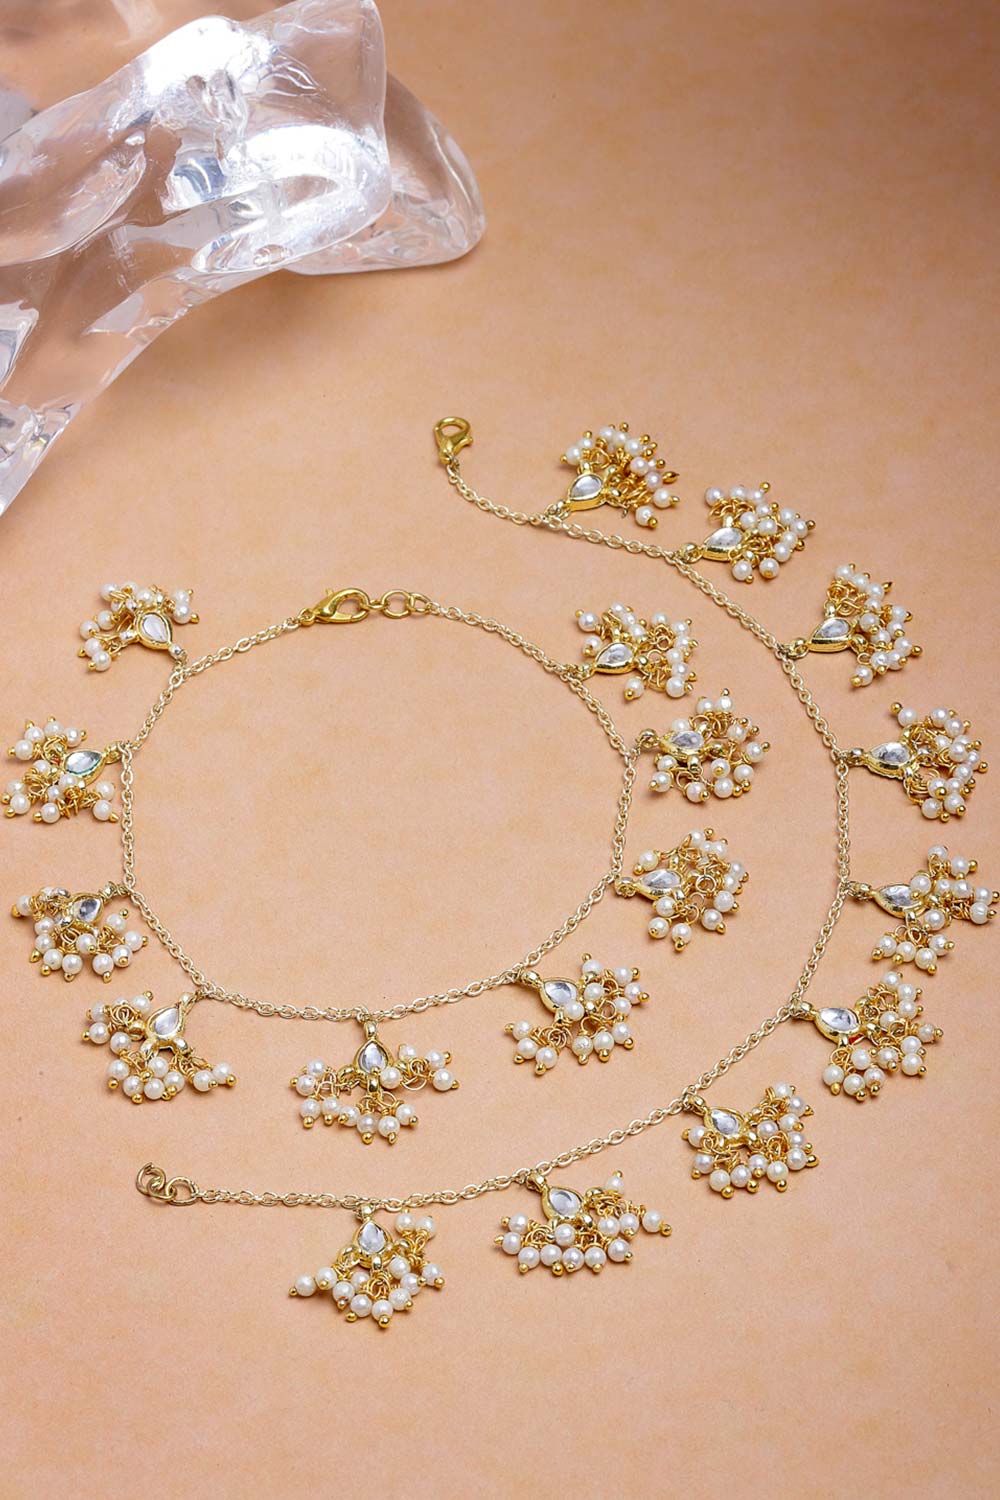 Shop Katalia Gold & White Gold-Plated Kundan And Pearl Anklet Ghungaroo at best offer at our  Store - One Minute Saree